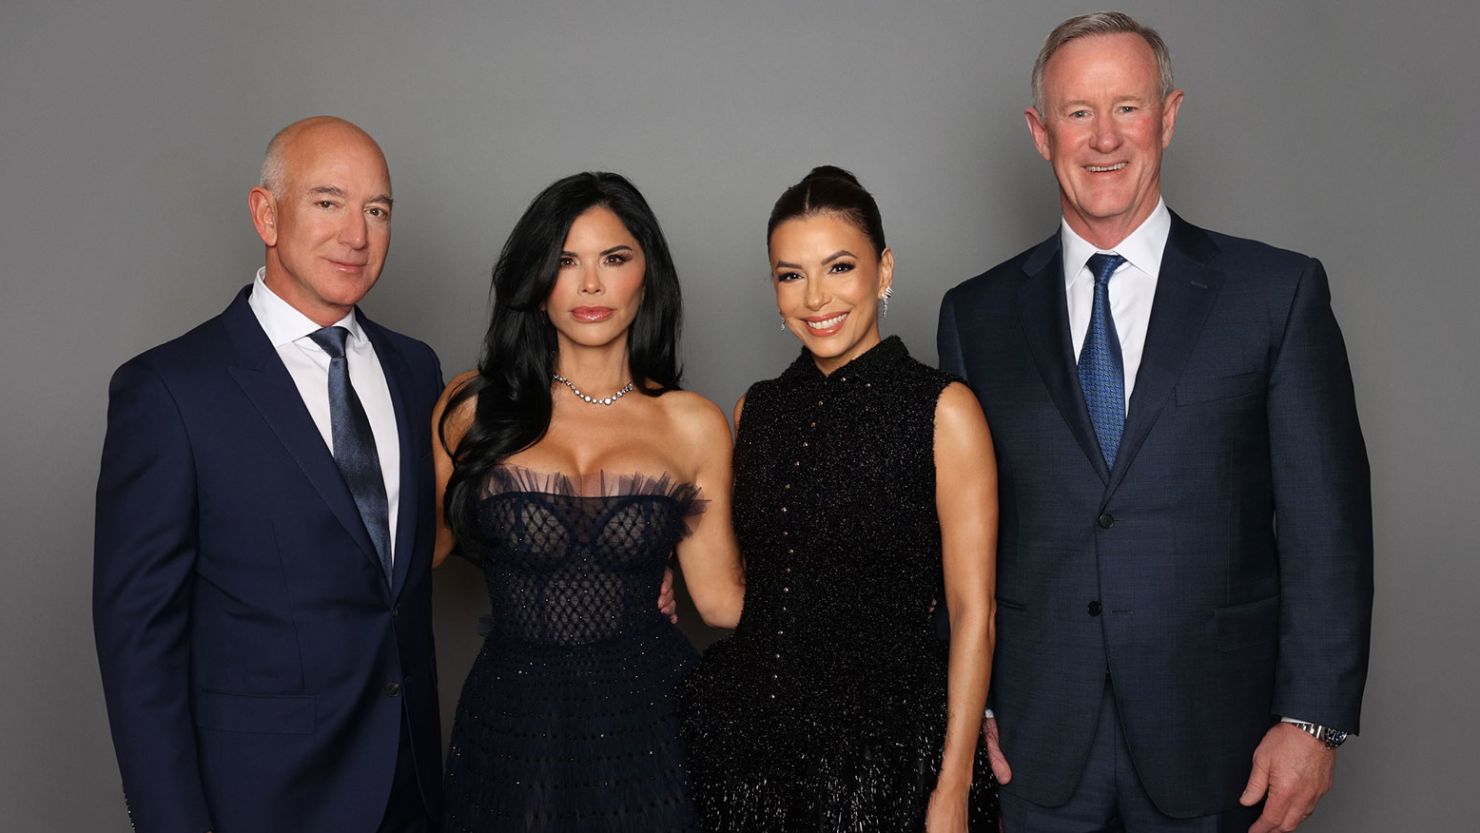  Amazon founder Jeff Bezos and his fiancée Lauren Sánchez are awarding $50 million each to Bill McRaven, a retired Navy admiral and former chancellor of the University of Texas System, and actor and entrepreneur Eva Longoria as part of Bezos’ annual prize to individuals who make significant contributions to society.